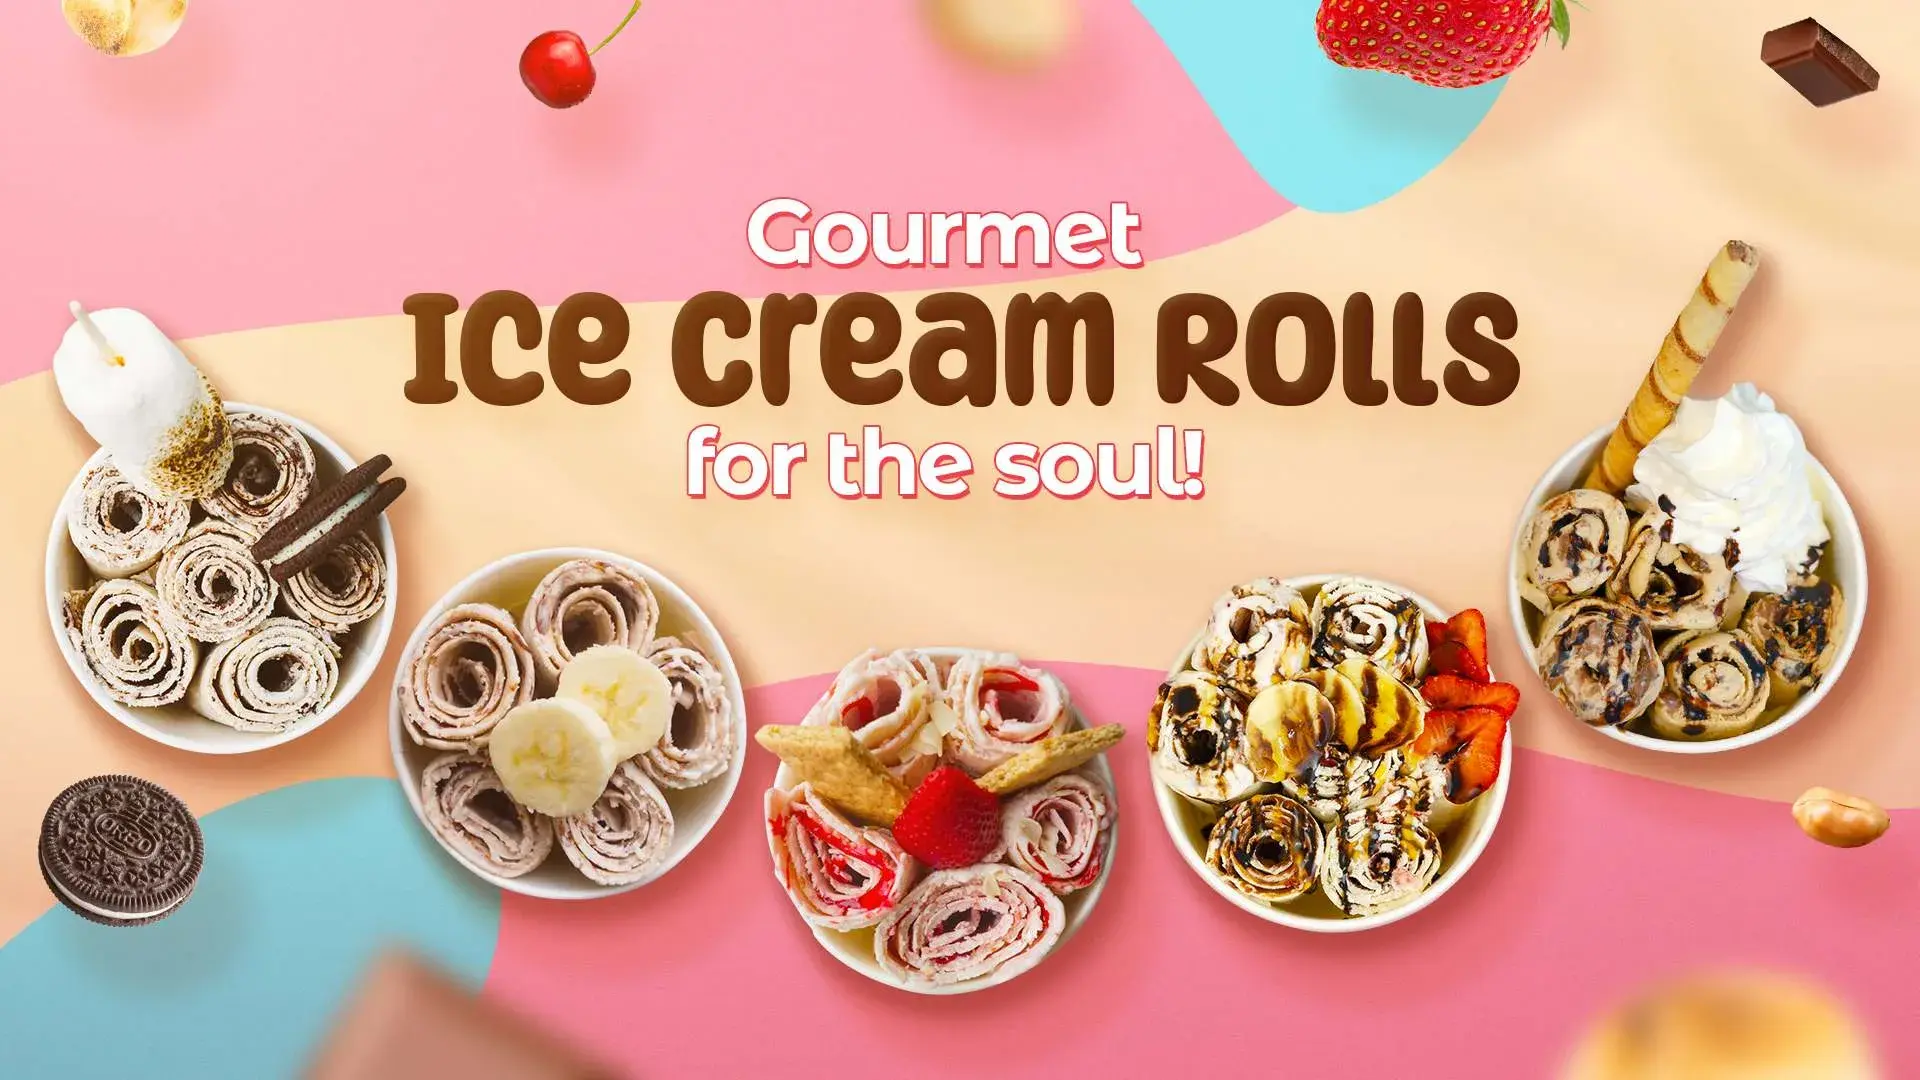 Gourmet ice cream rolls for the soul.